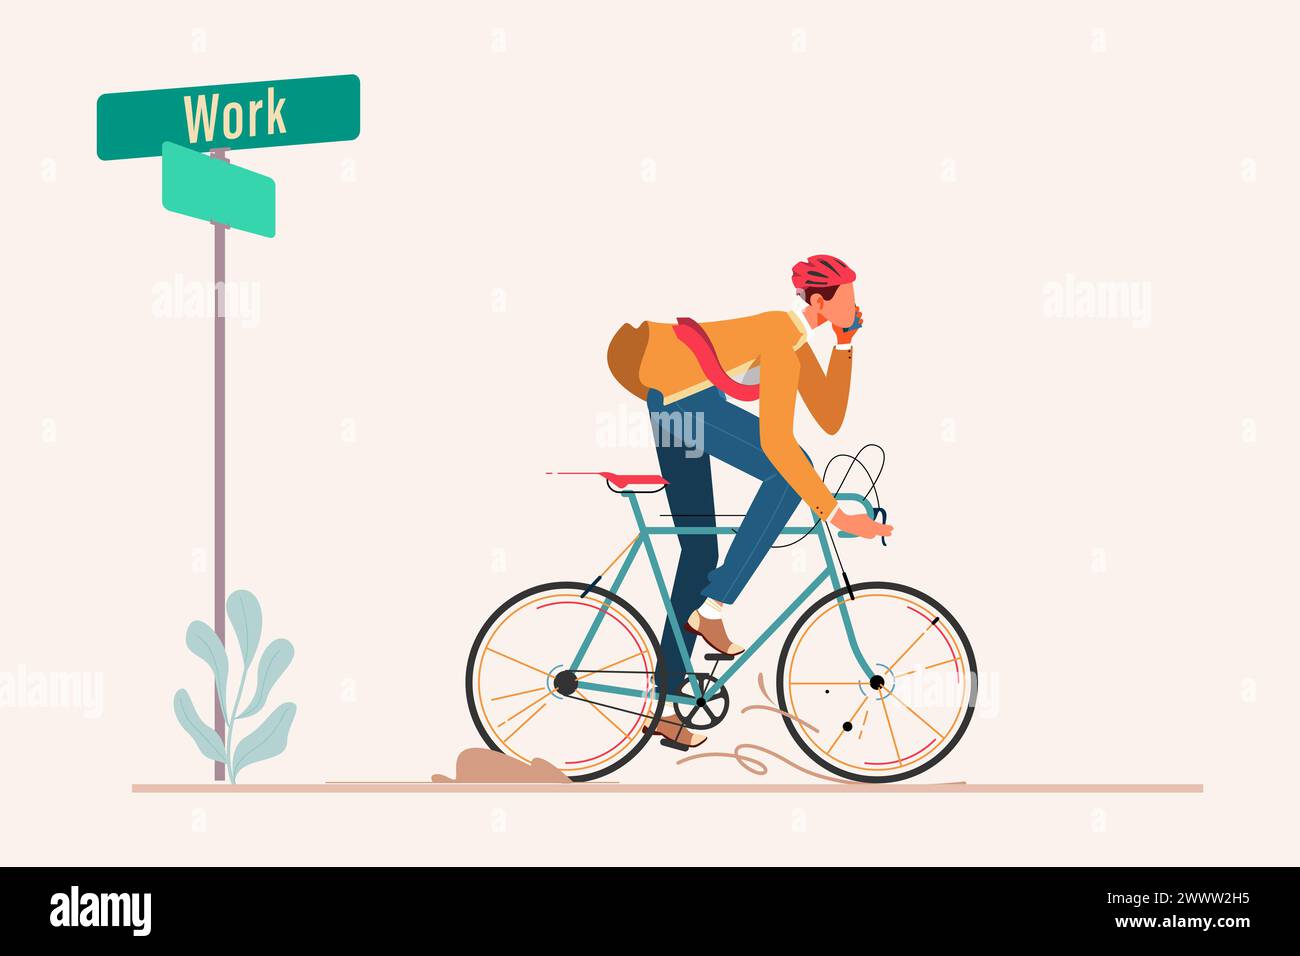 Bussinesman Riding Bycicle to Work Flat Design Concept, A Man Ride Bycicle to Work Vector Illustration, Ecological Transport, Urban Life Stock Vector